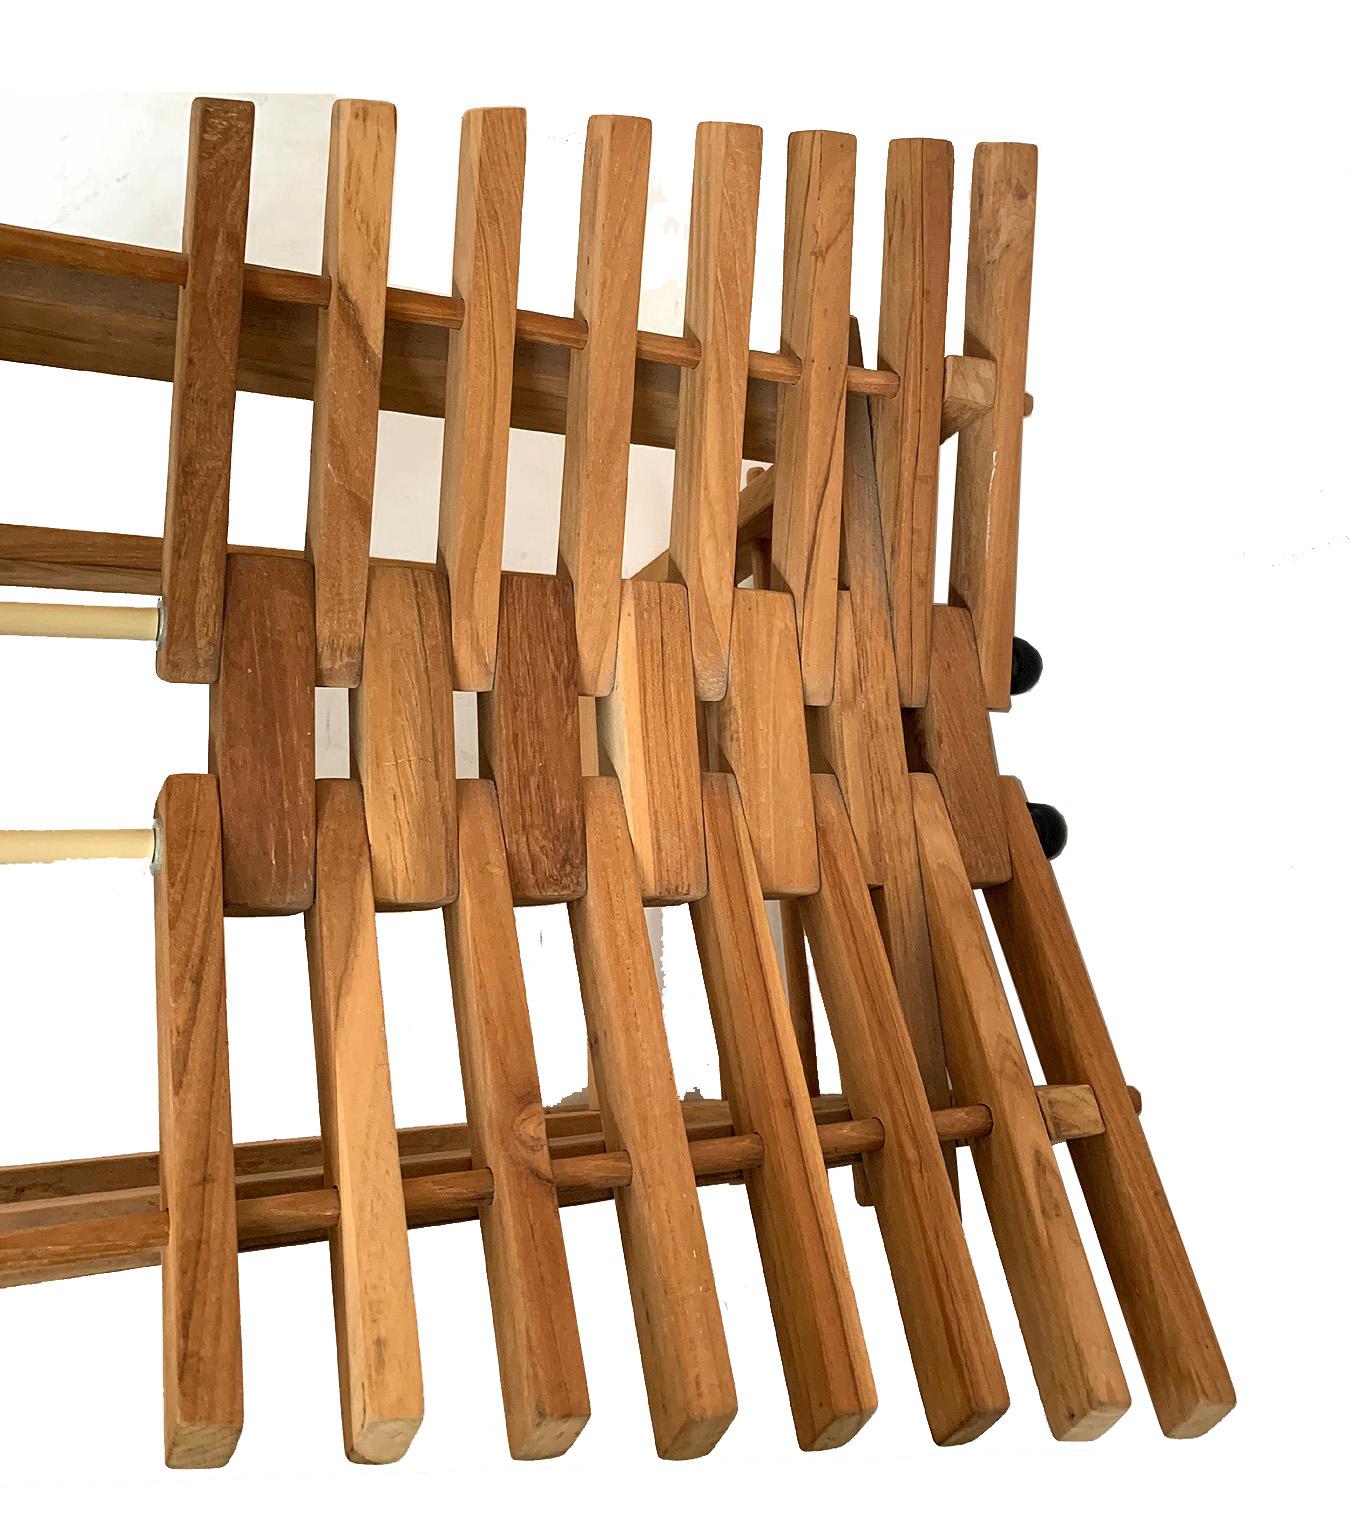 Designed by the Italian artist Anacleto Spazzapan these tall modern beechwood chairs have a detailed sculptural appearance. The tall ladder back is reminiscent of the designs of the Scottish designer Charles Rennie MacIntosh. They are very